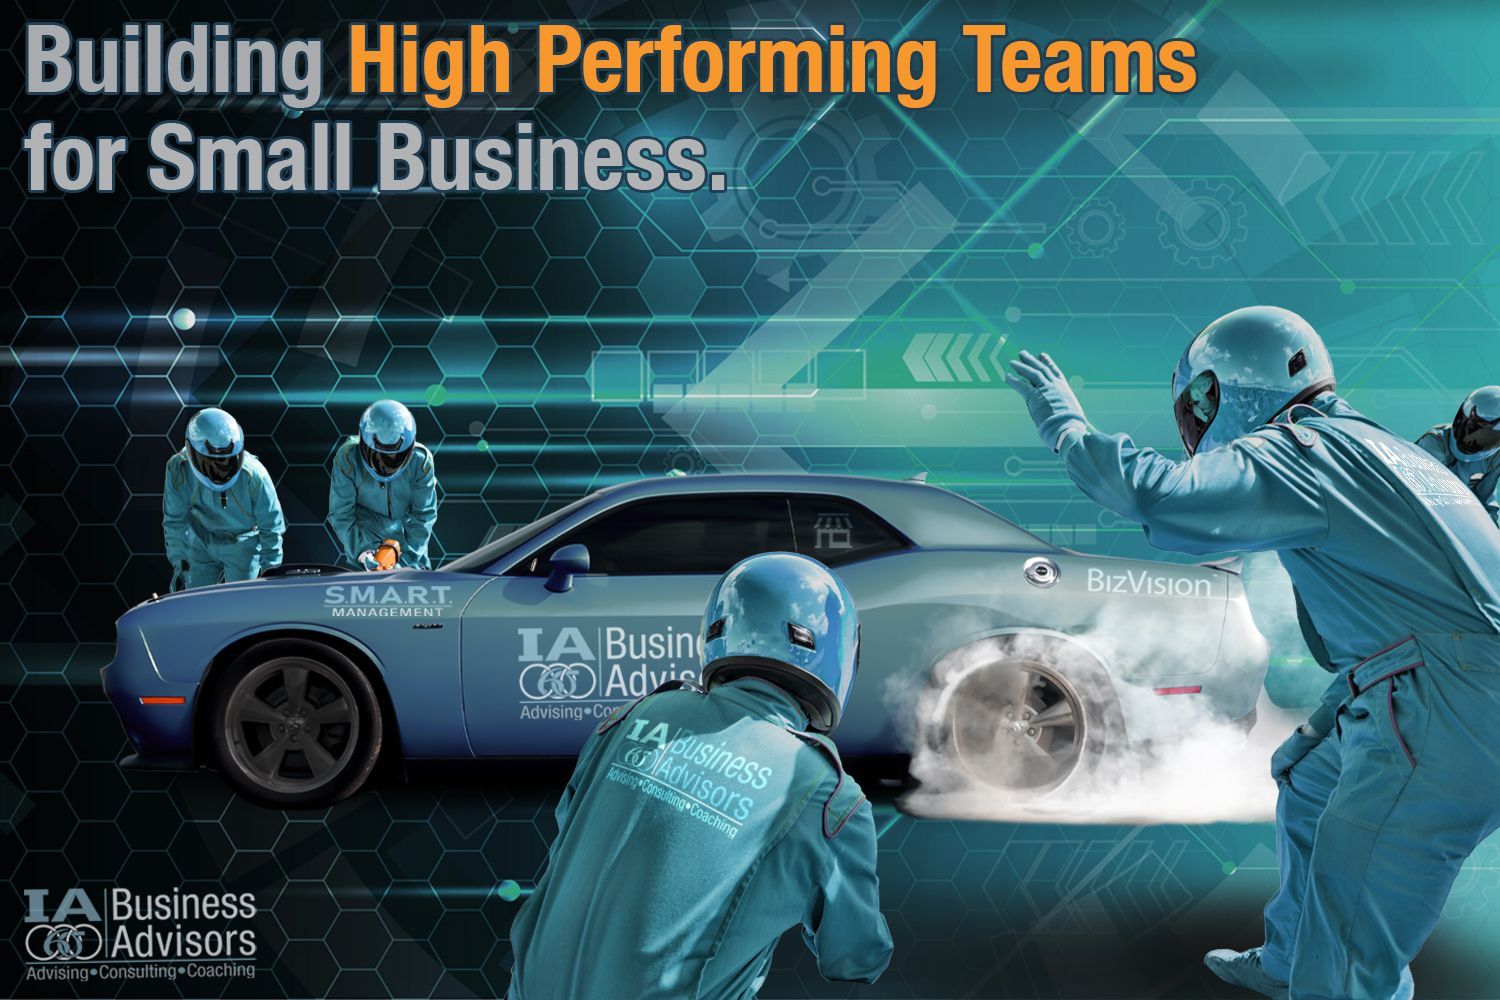 Building High Performing Teams for Small Business